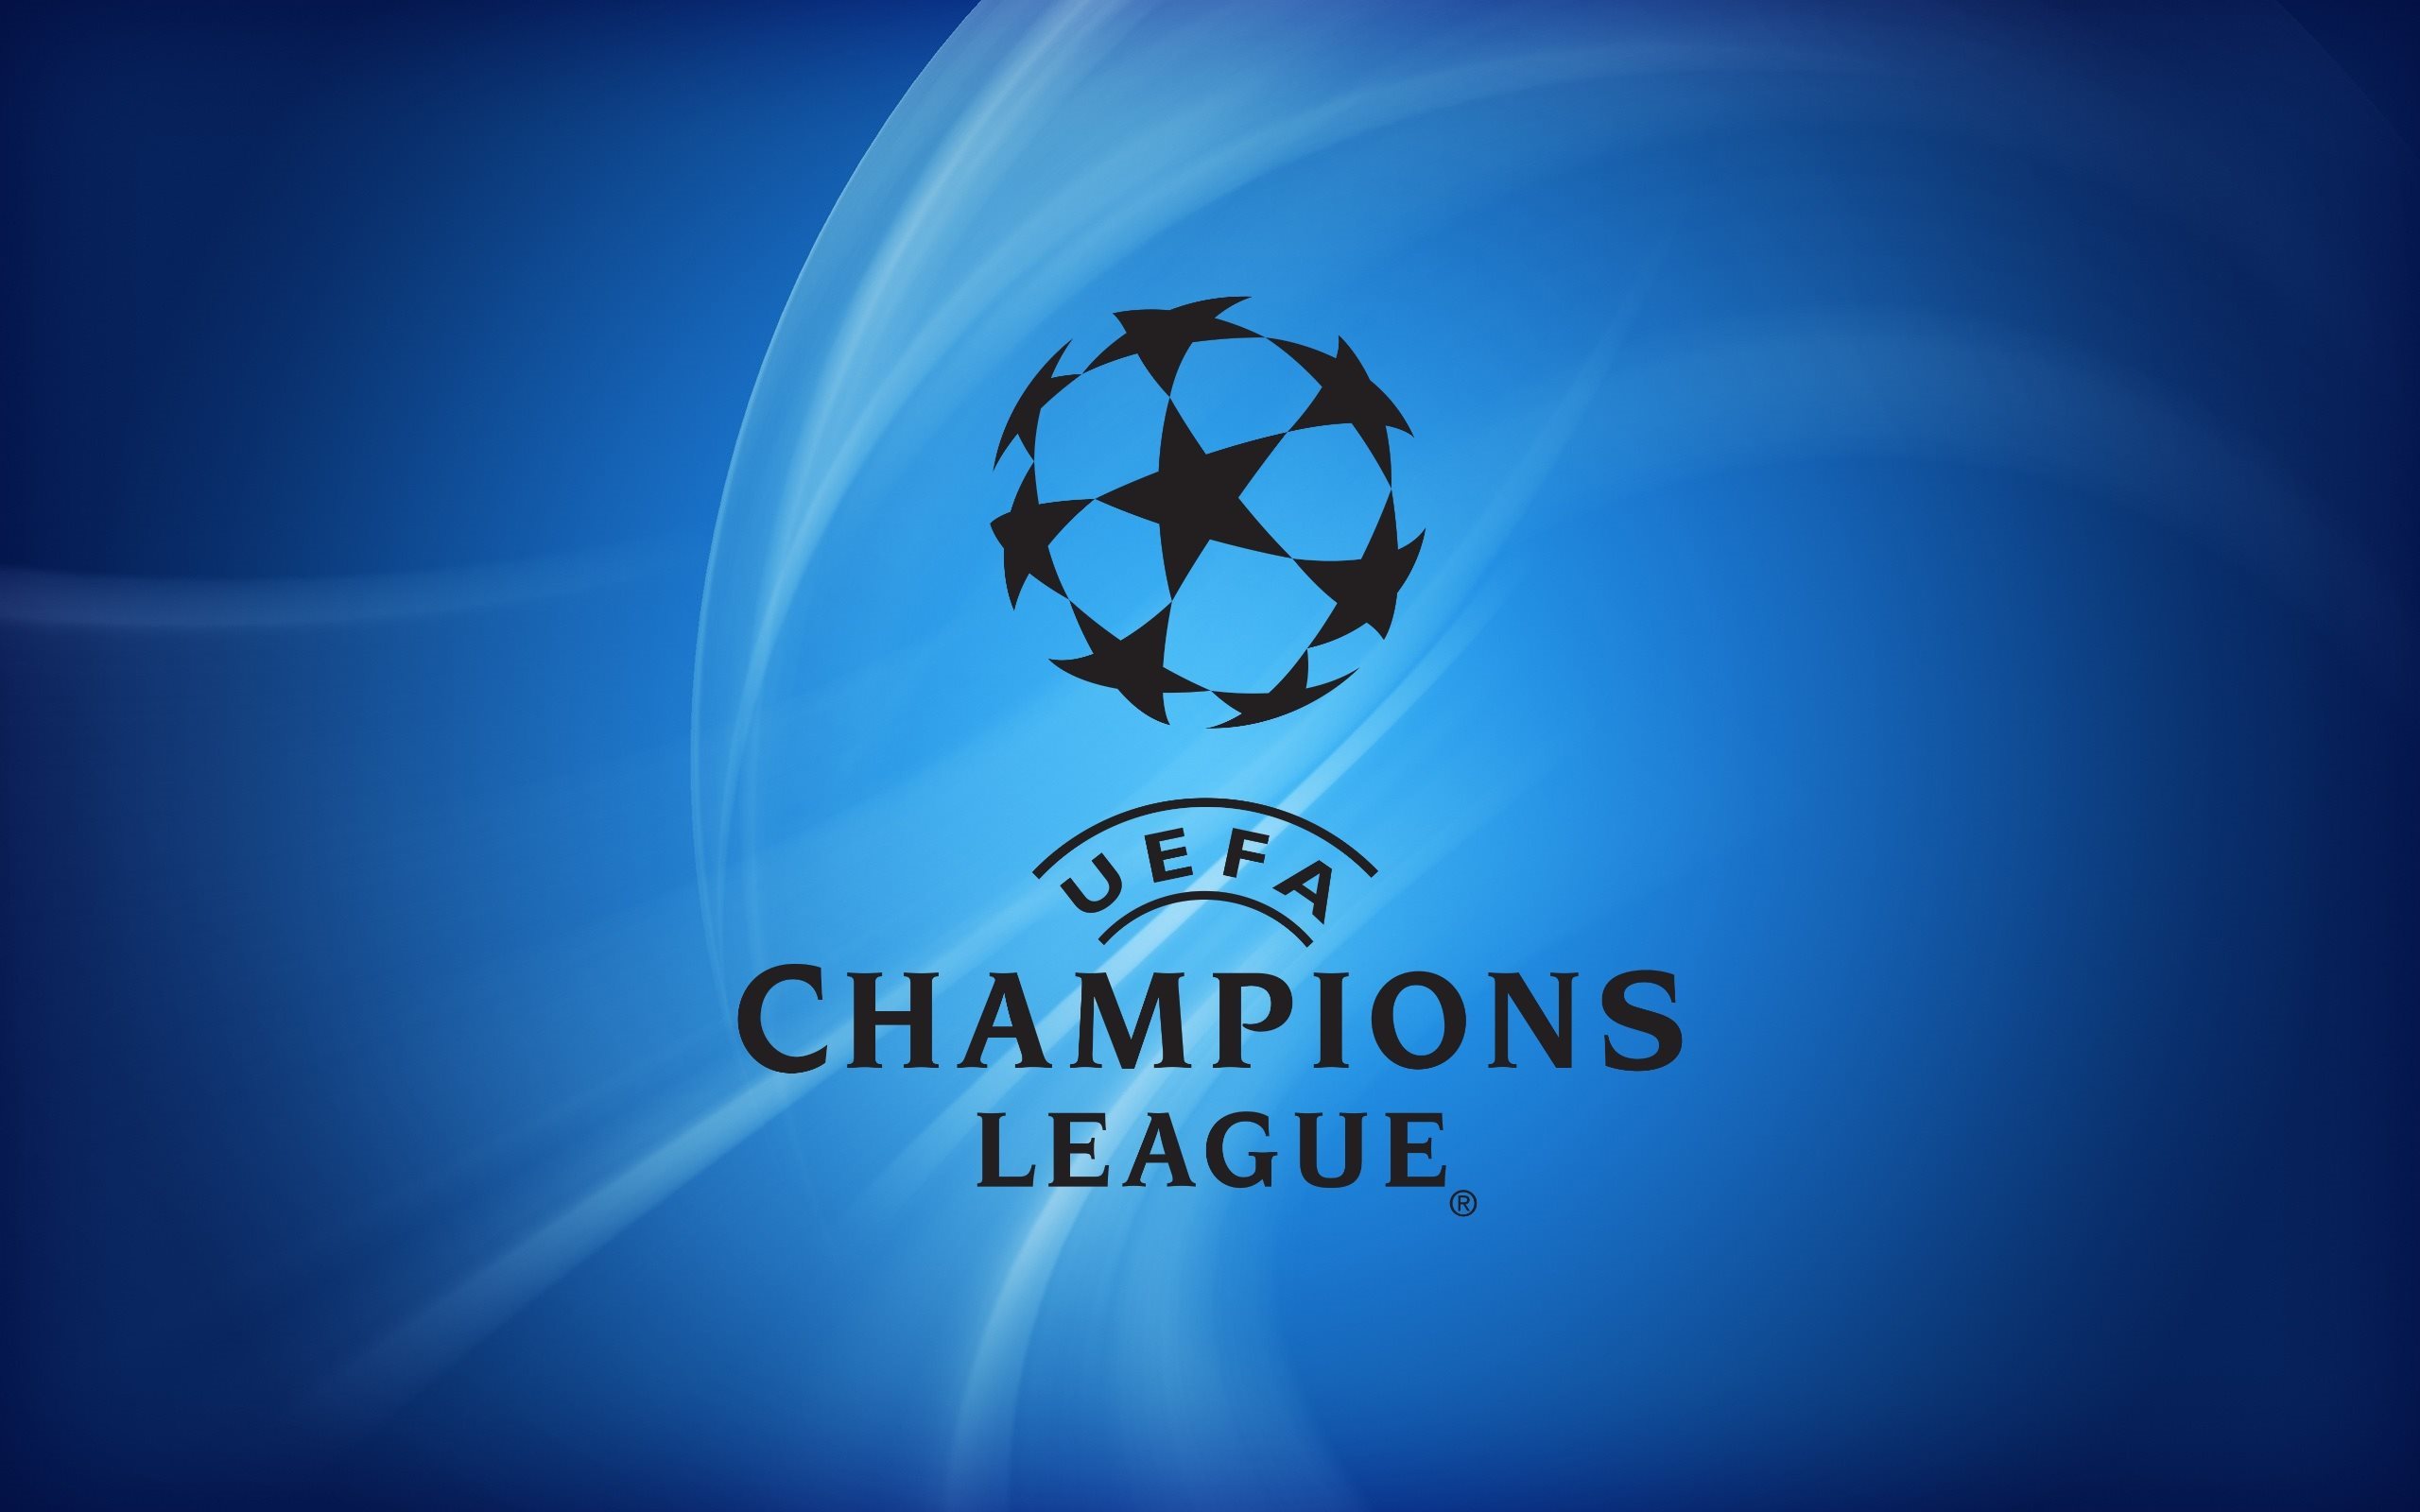 Download wallpaper uefa, uefa champions league, logo, football for desktop with resolution 2560x1600. High Quality HD picture wallpaper